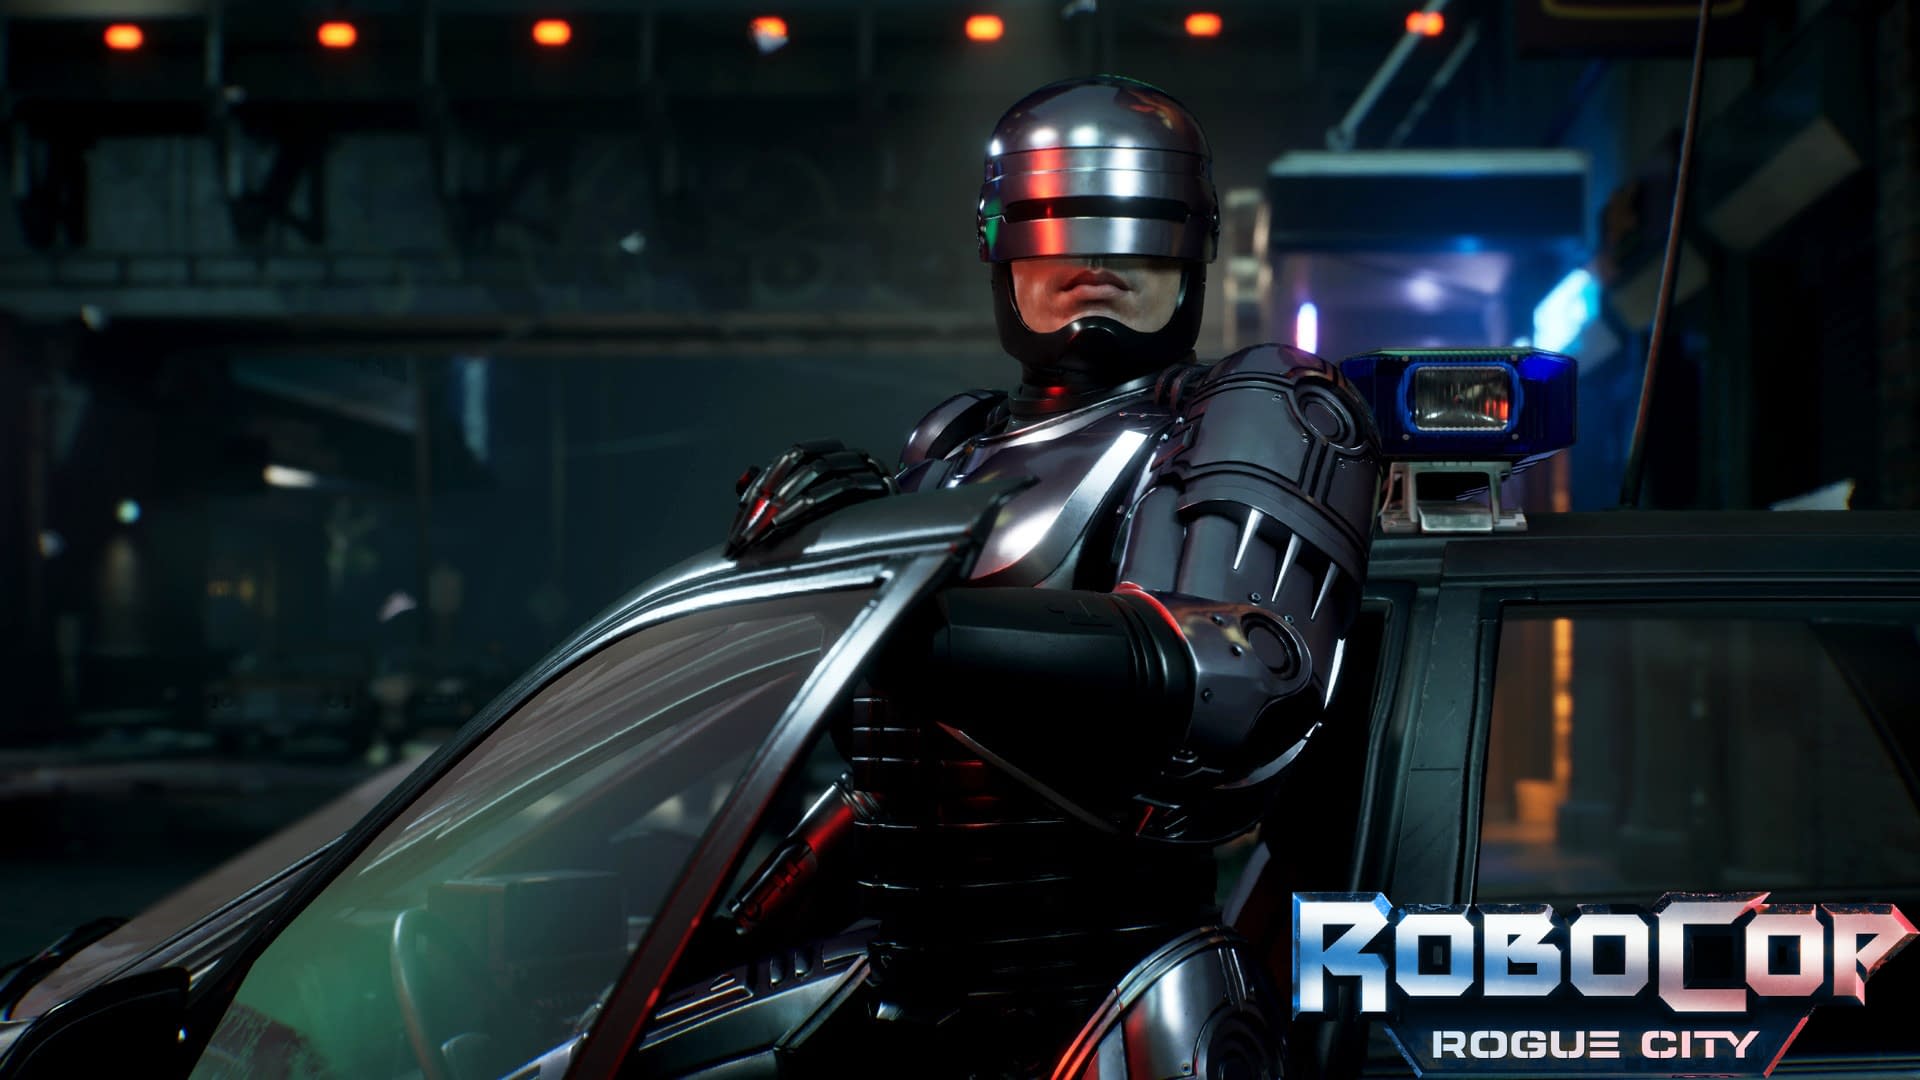 Robocop: PC Demo for Rogue City Now Available